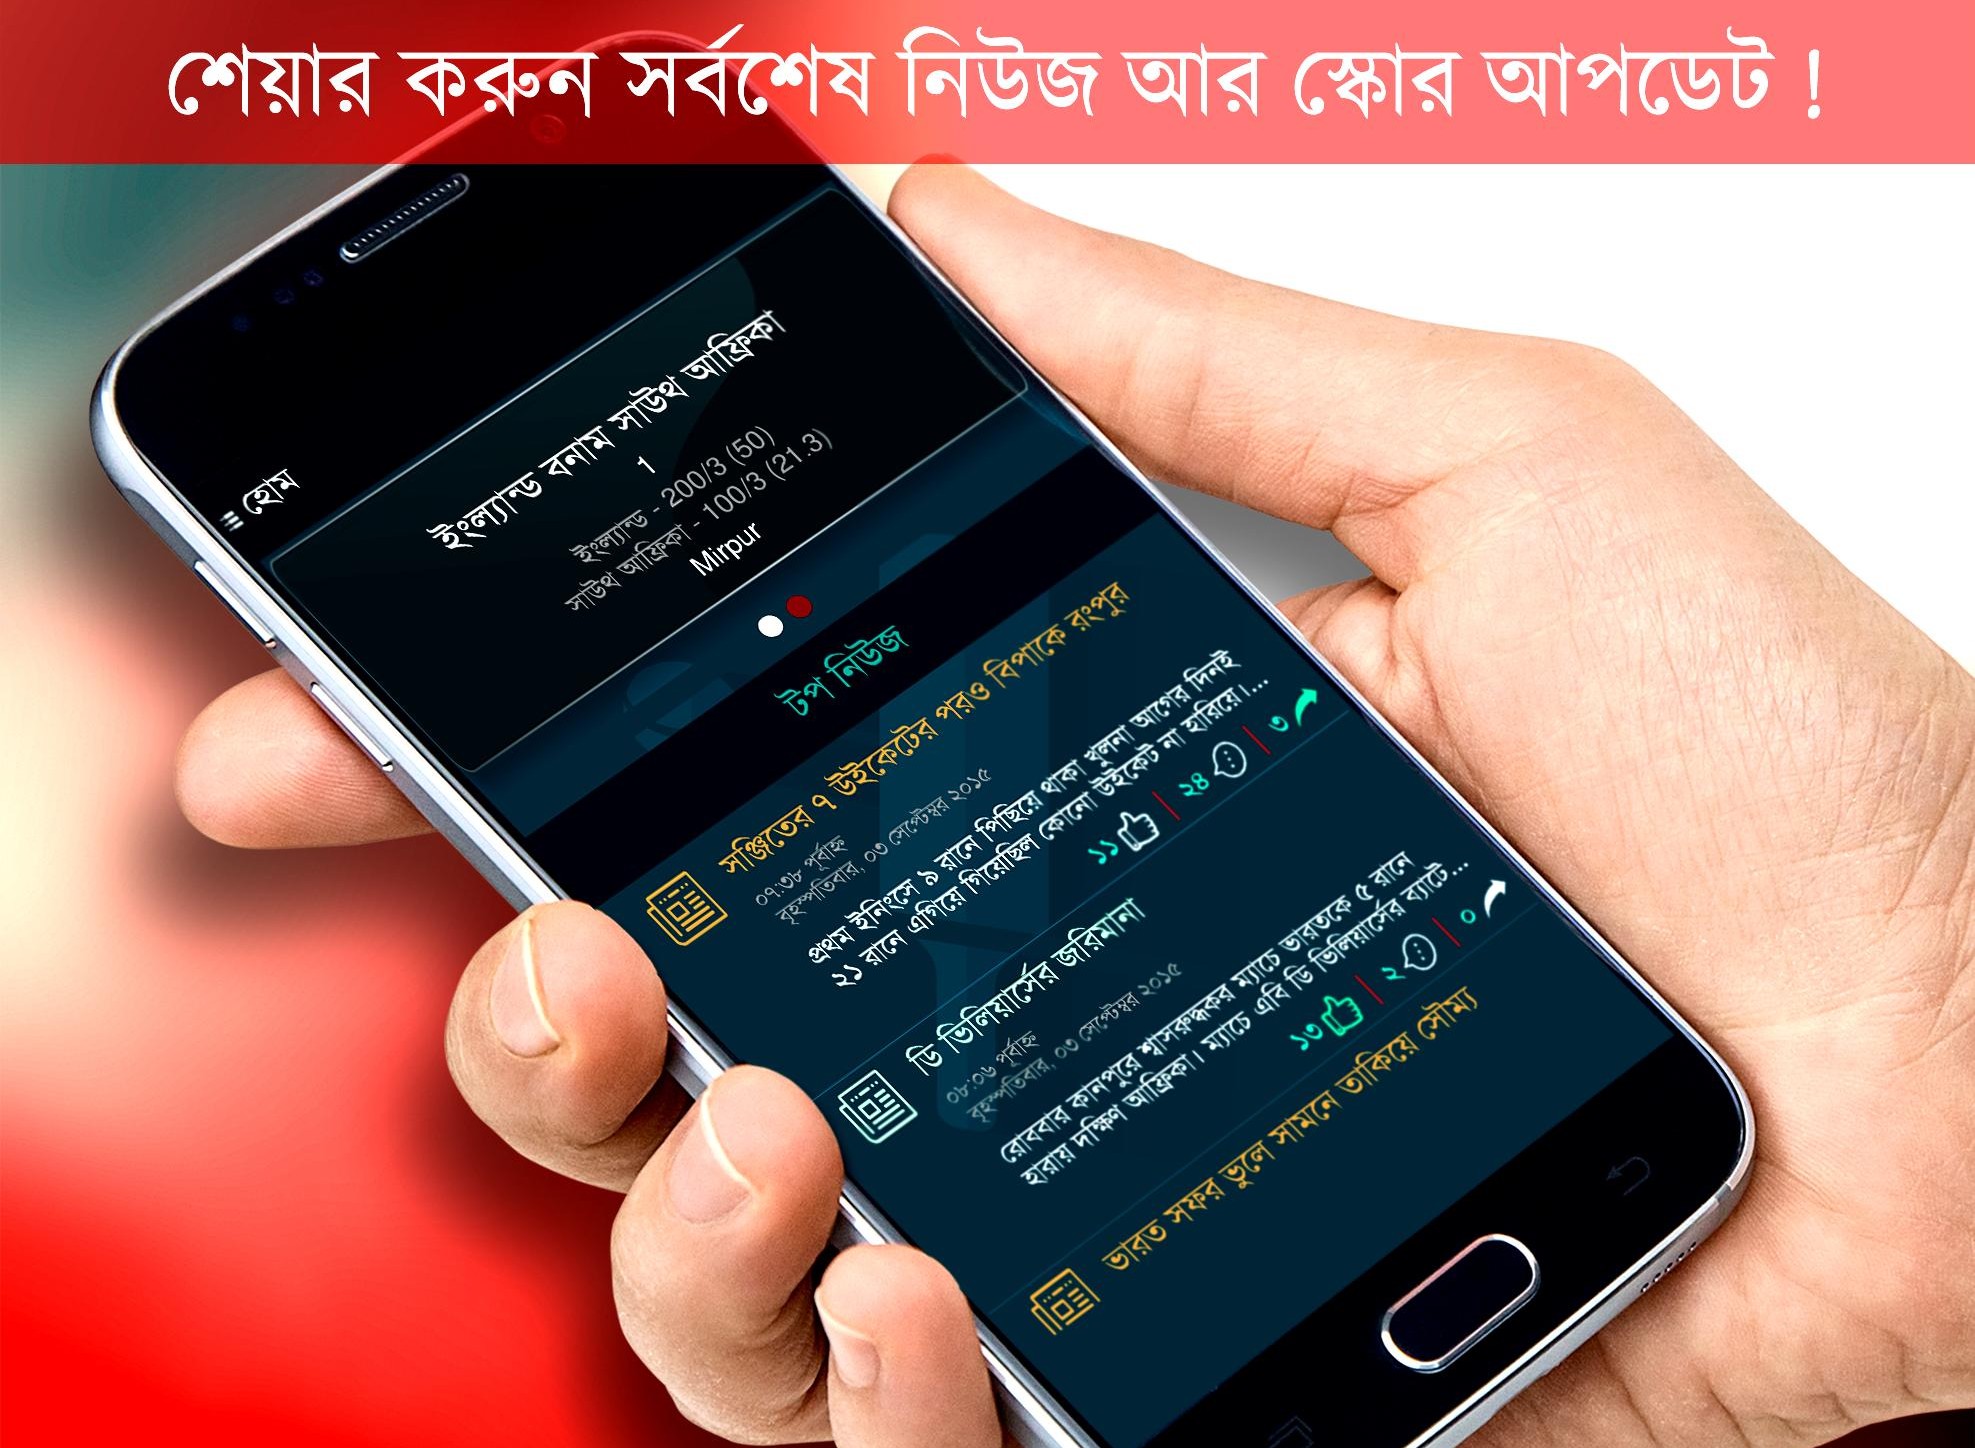 Complete Cricket App for you in Bangla